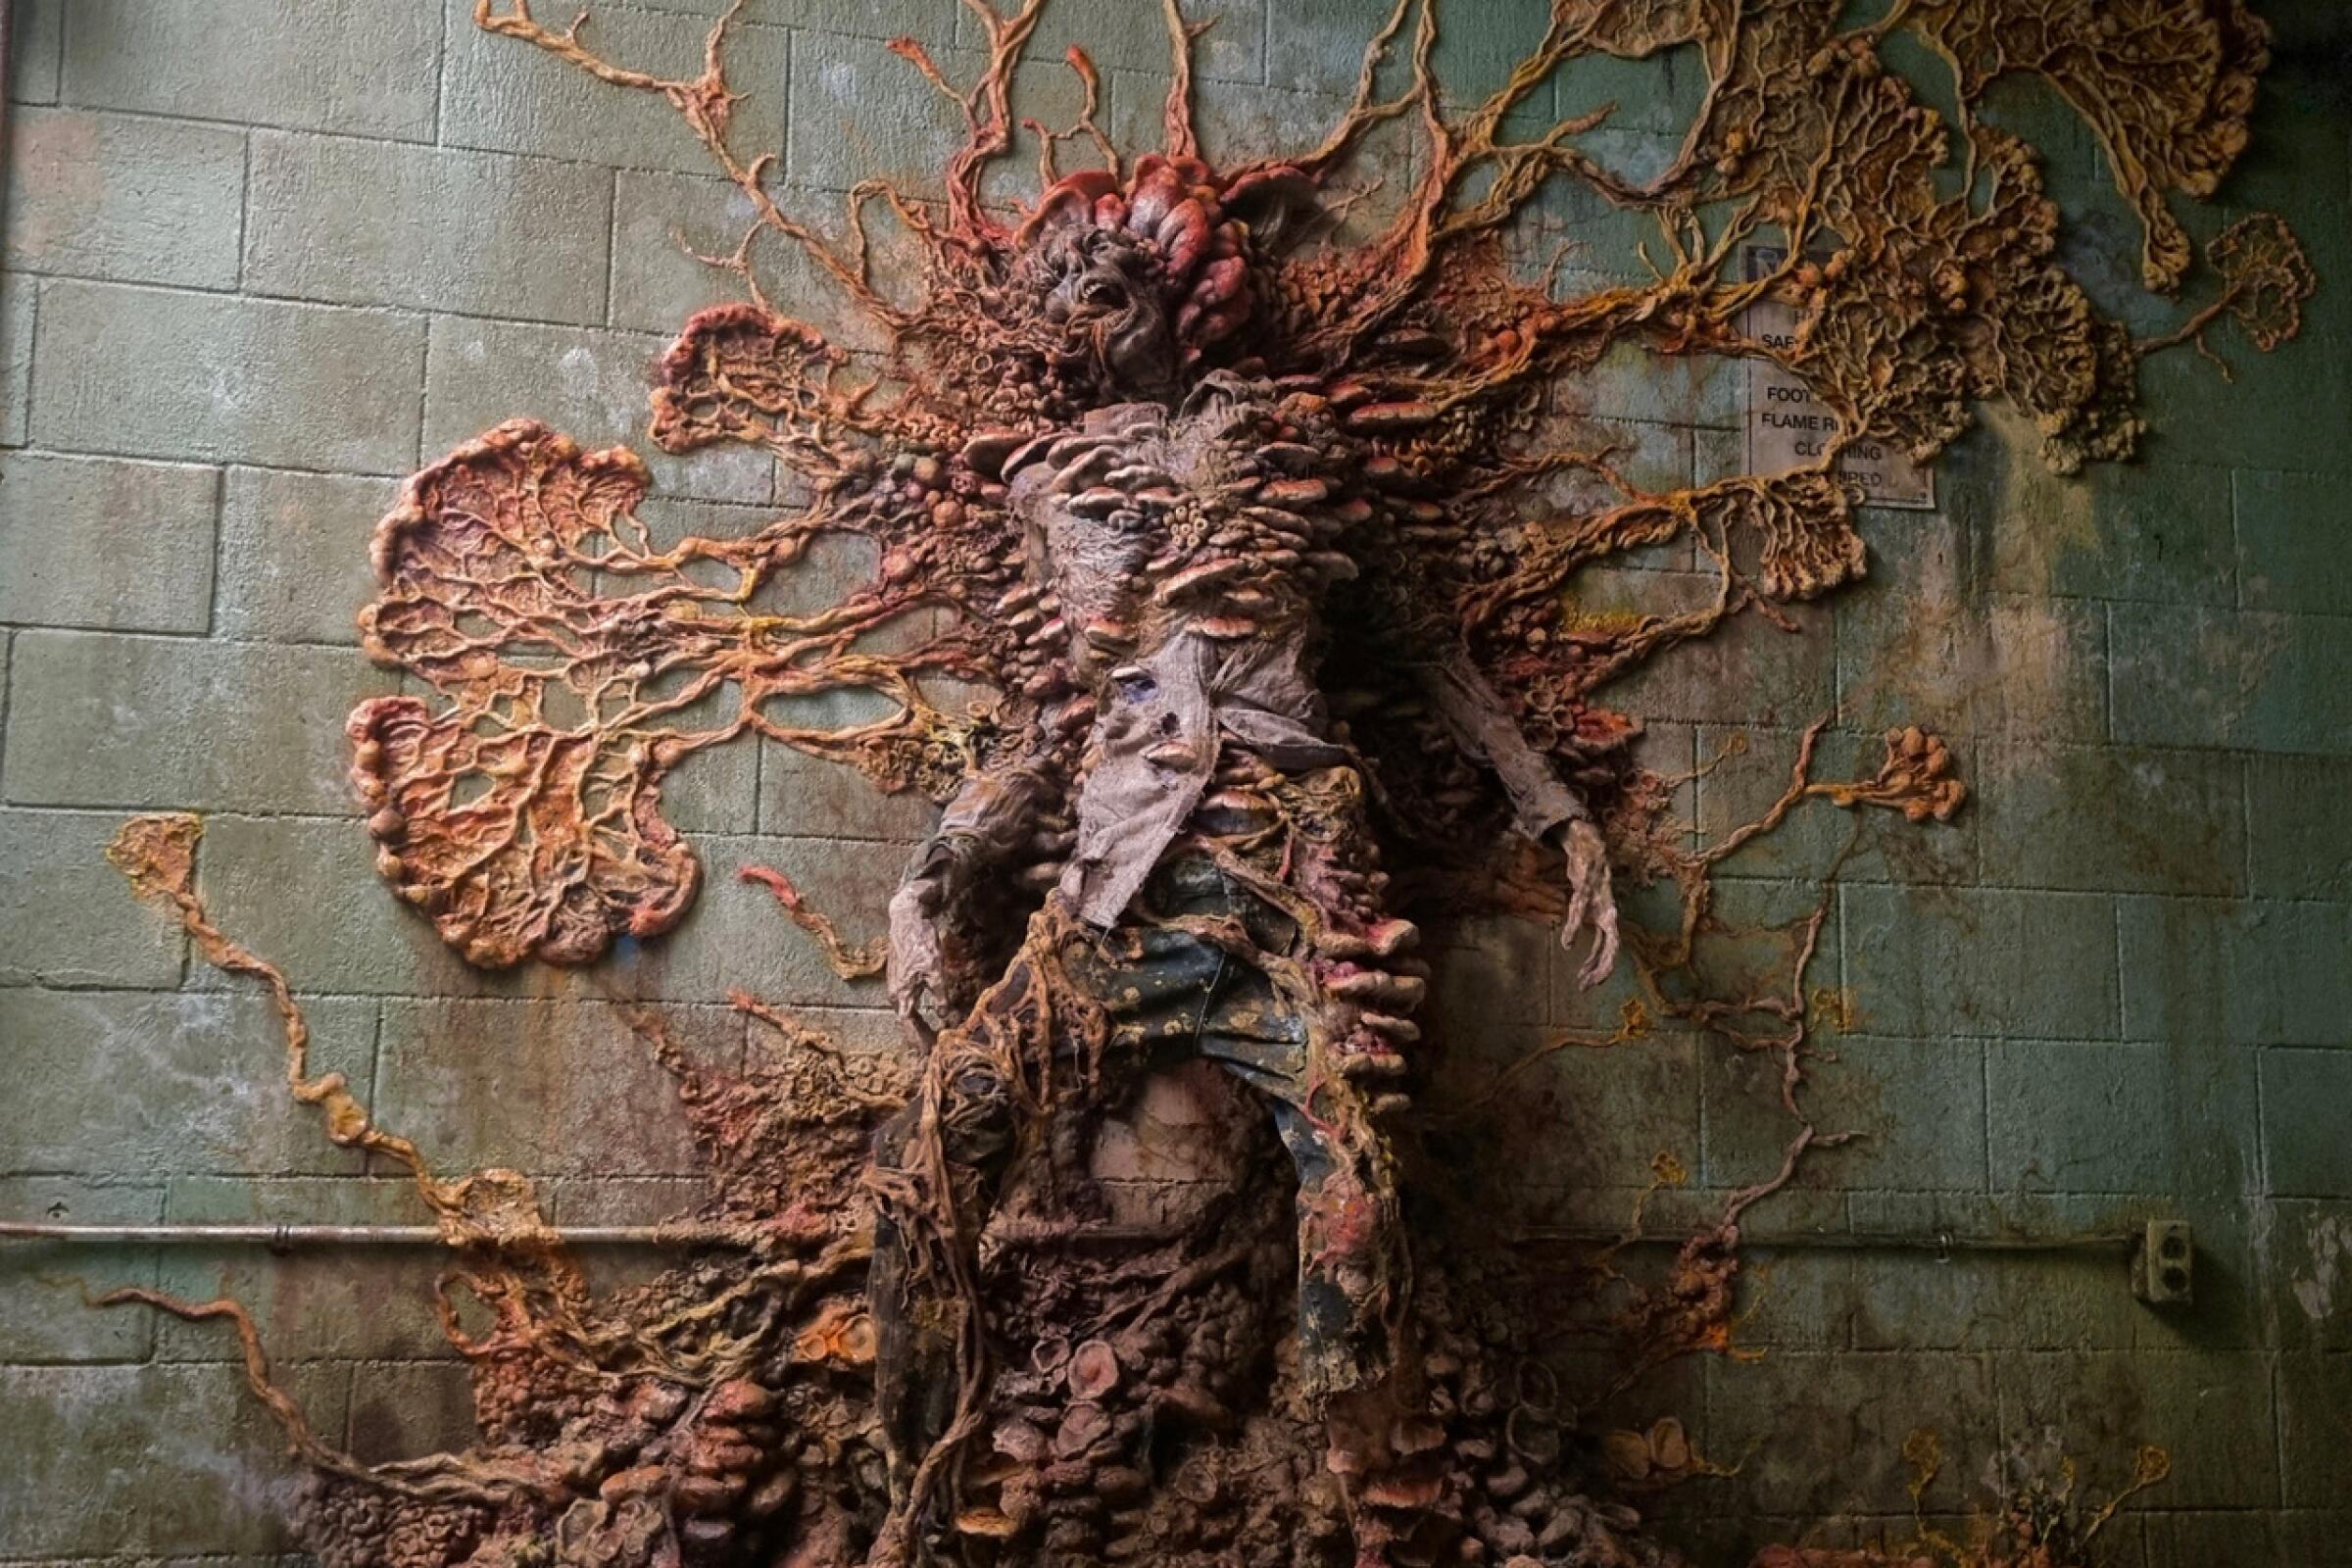 A fungal-infected human sprouts stalks that pin him to a wall in "The Last of Us."